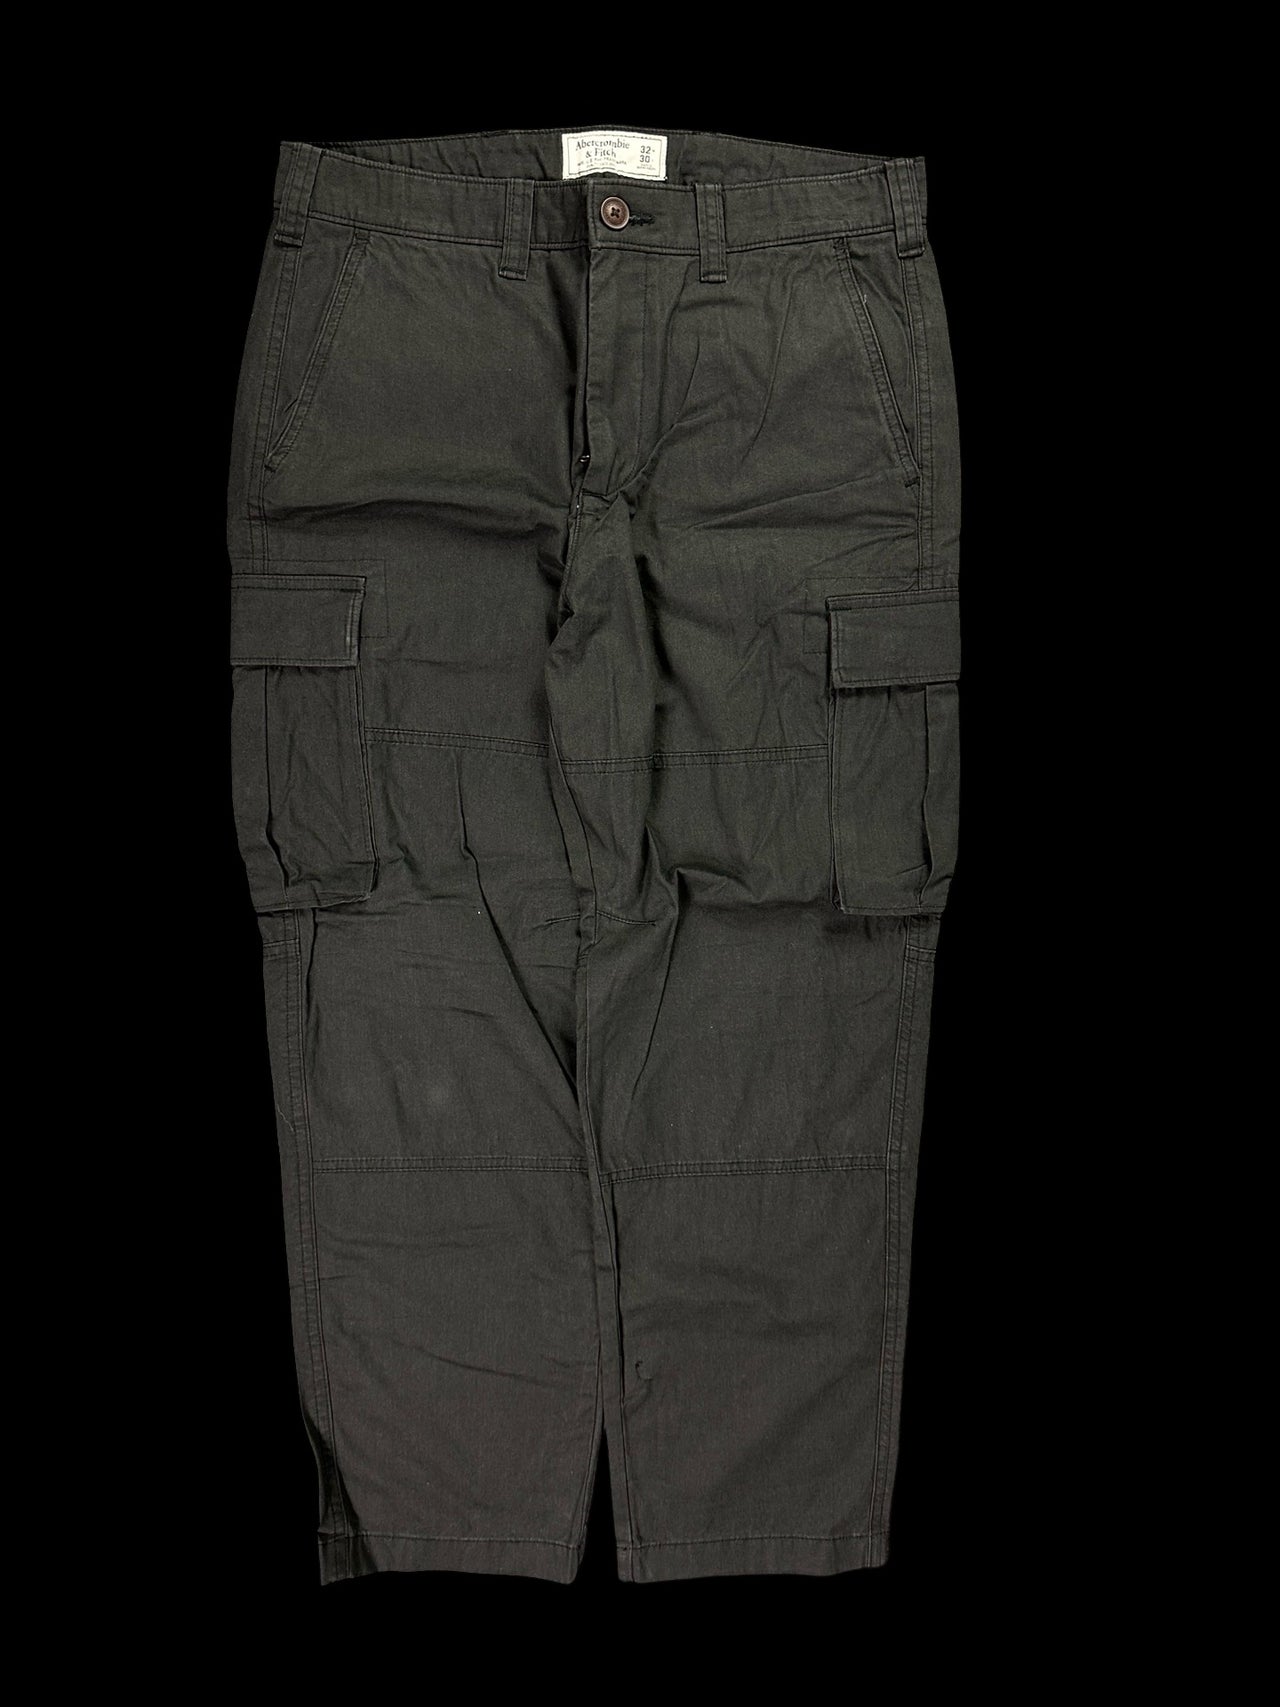 Abercrombie & Fitch Cargos (S-M)